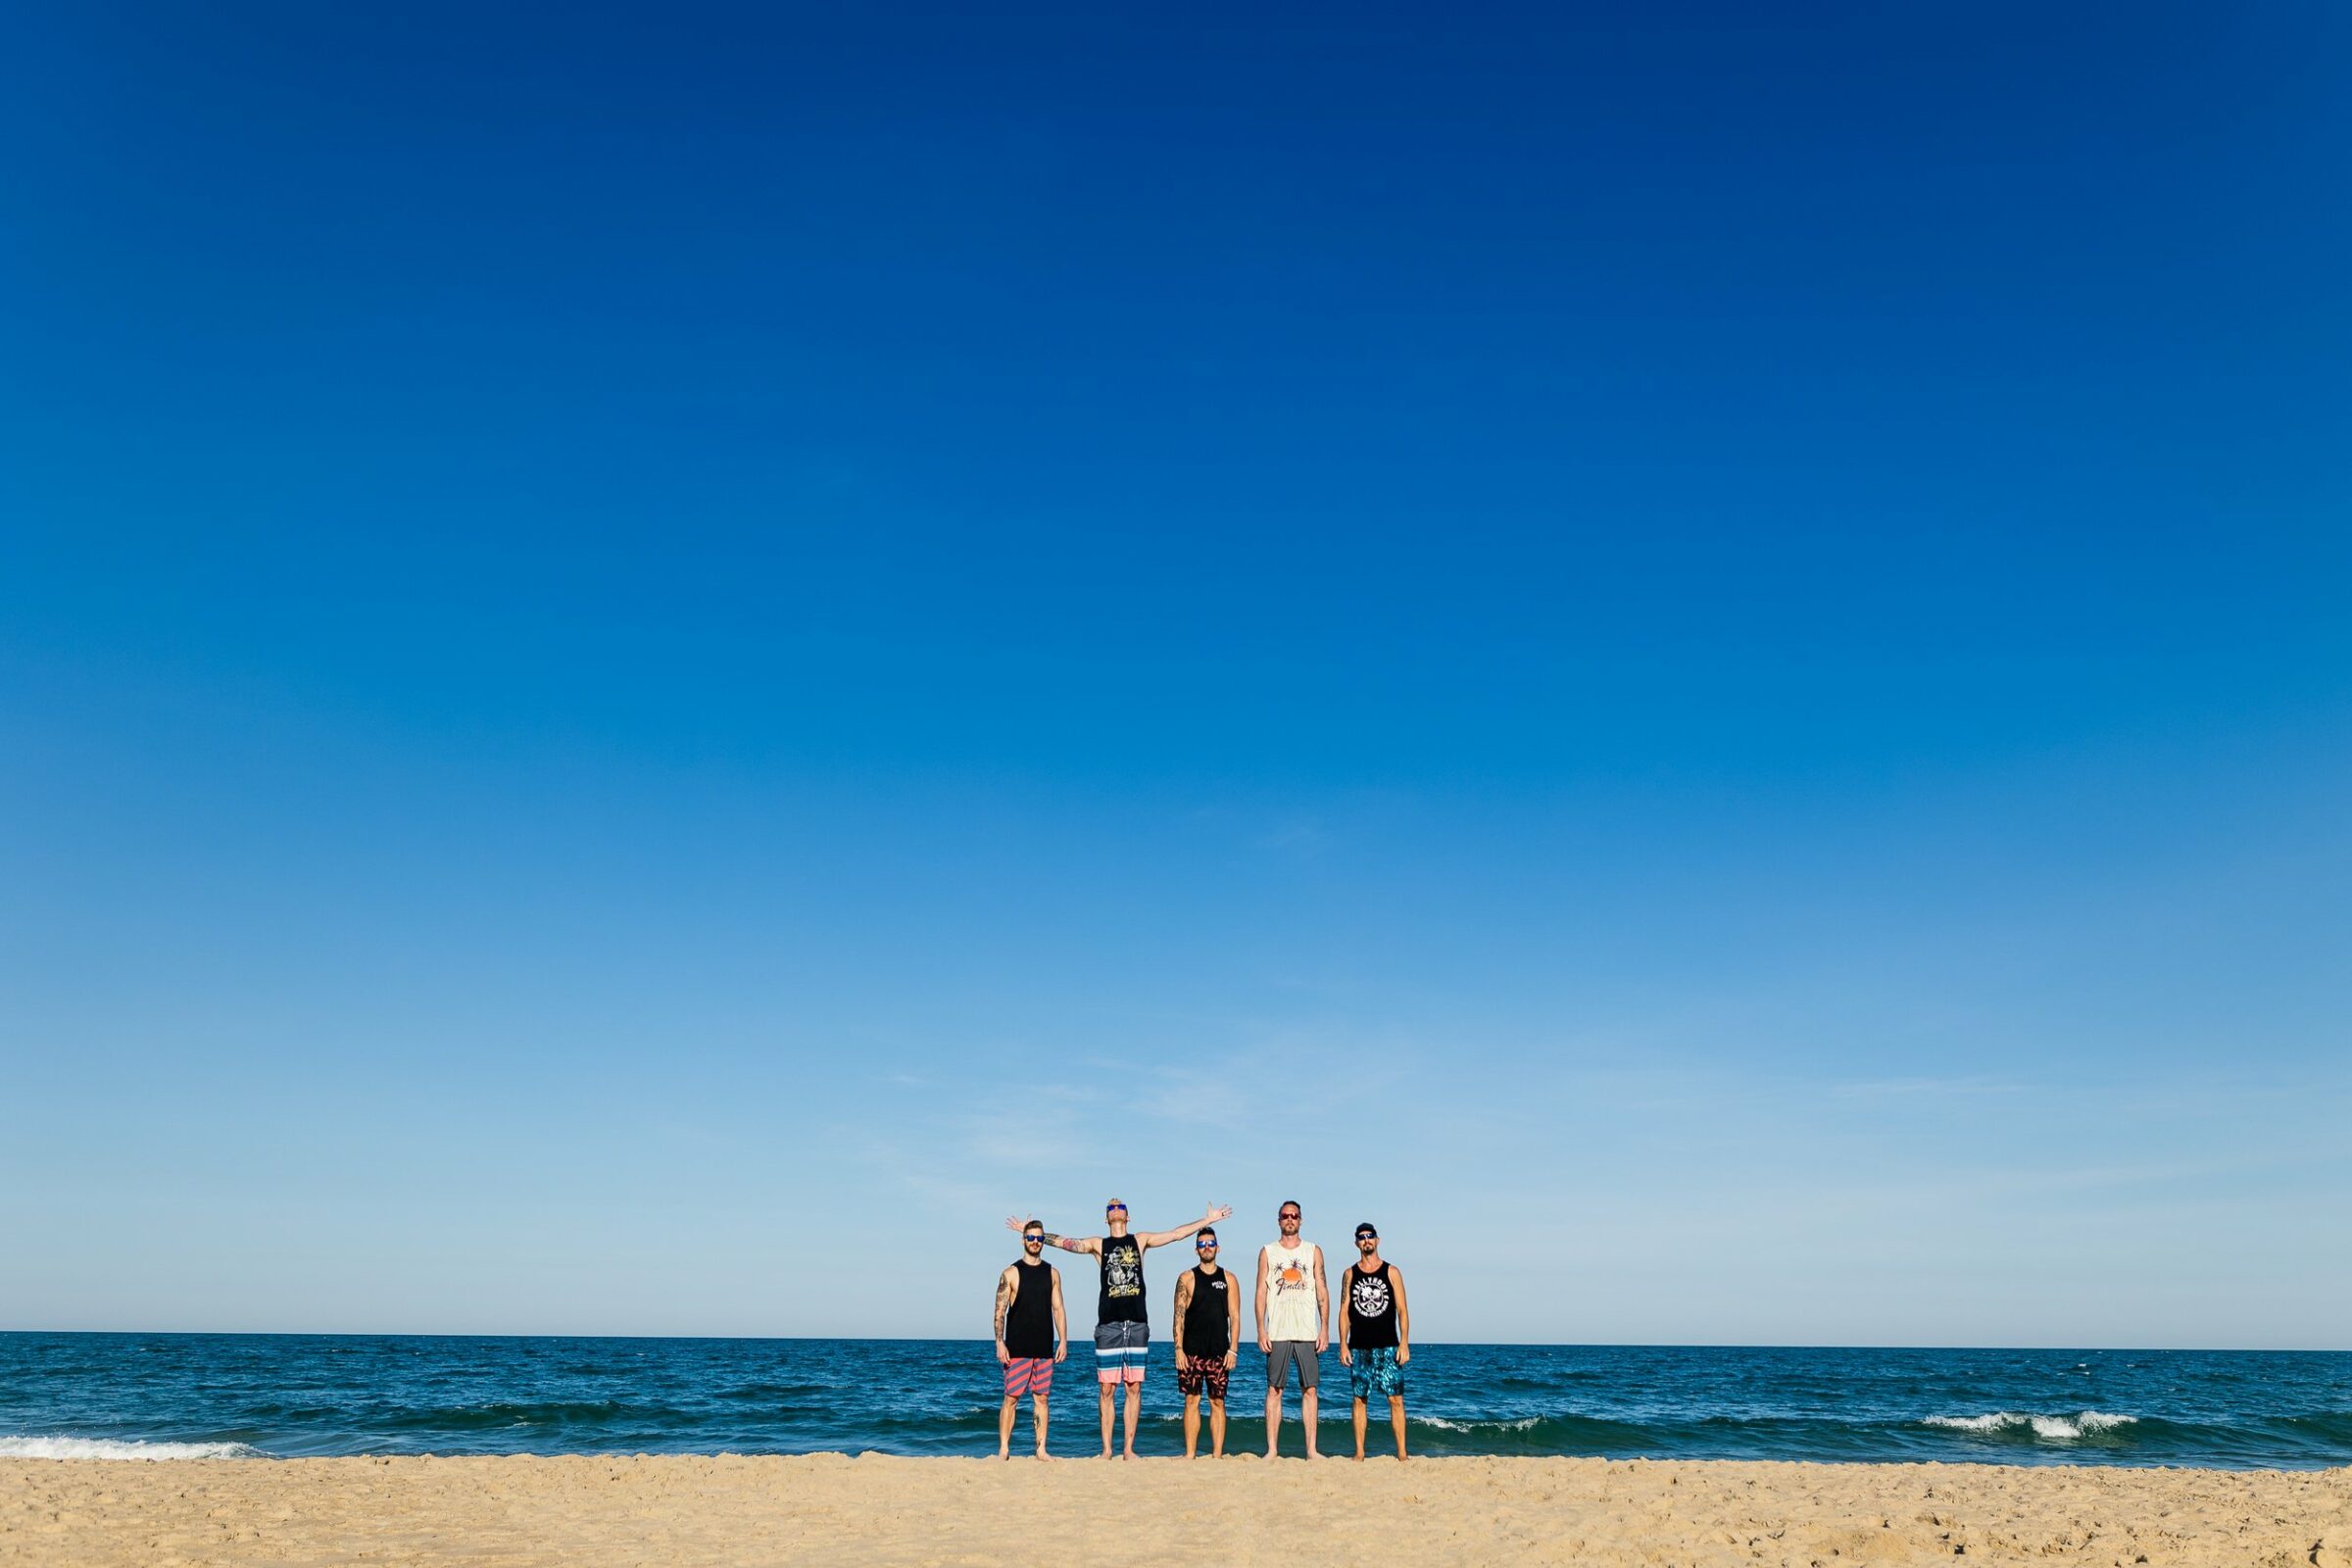 Five members of the band 'Ballyhoo' stand on a sandy beach with the ocean in the background under a clear blue sky. Each member is dressed in casual summer attire, including tank tops and shorts. The central figure has their arms outstretched, while the others stand relaxed with their hands at their sides.